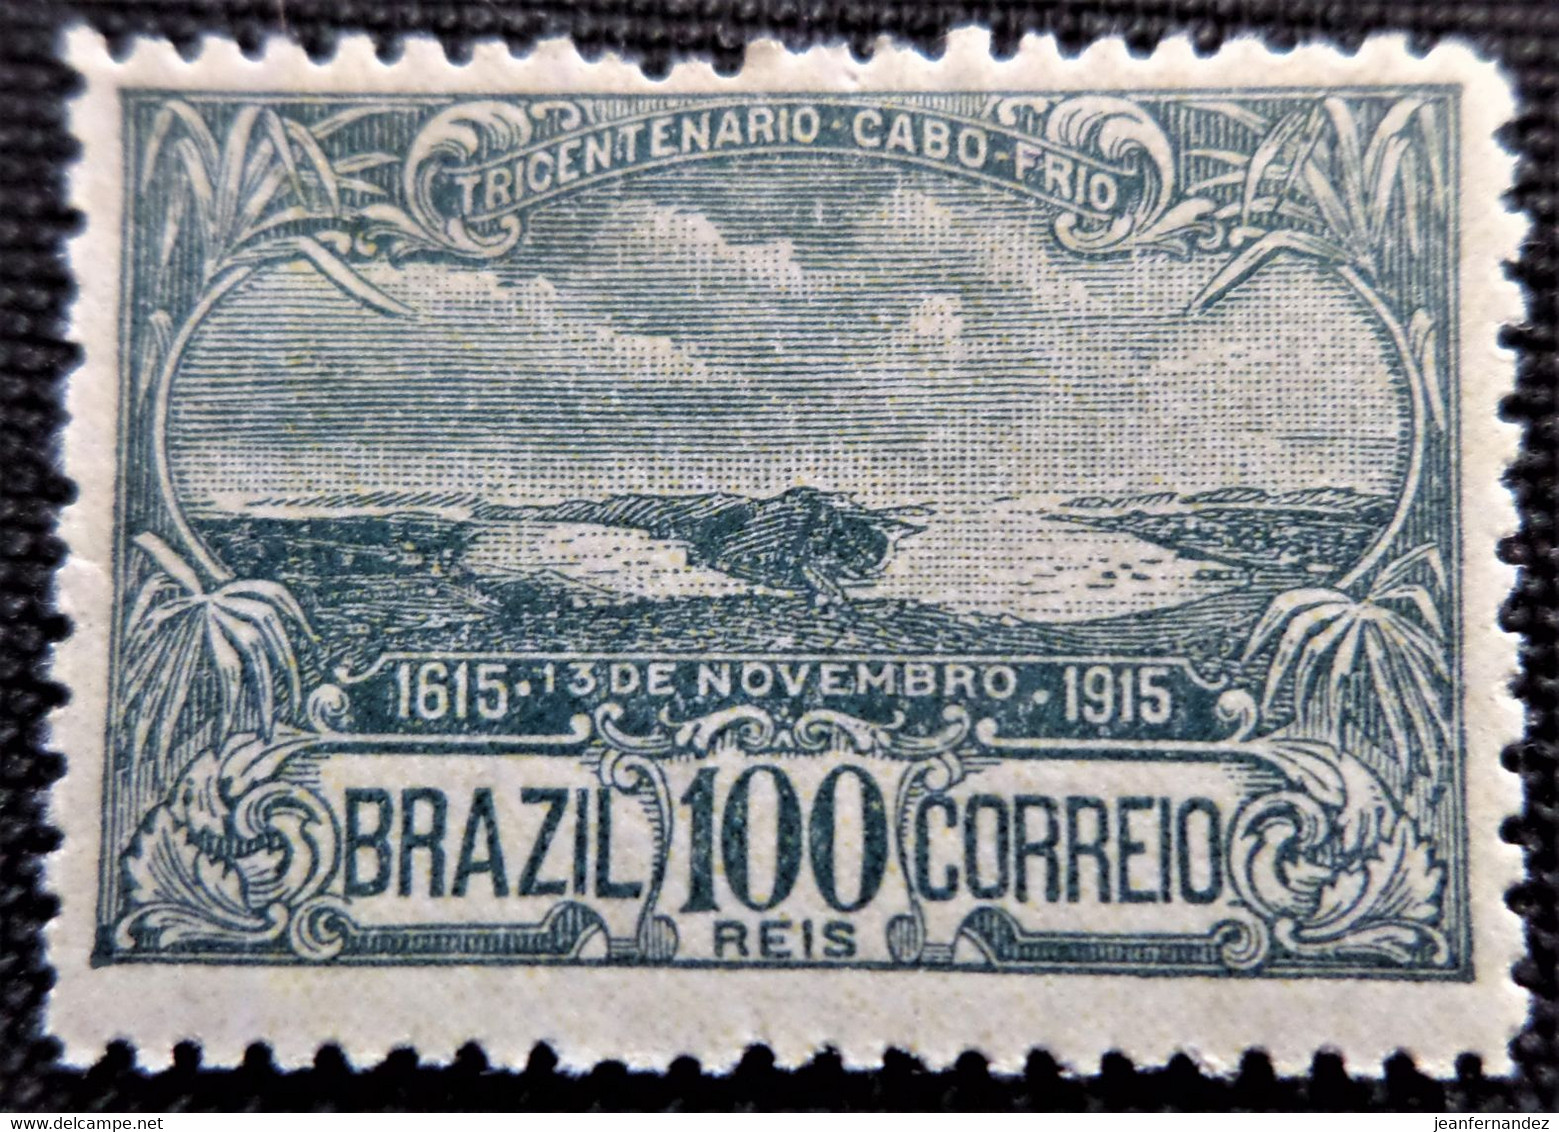 Timbre Du Brésil 1915  300th Anniversary Of The Founding Of Cabo Frio Stampworld N° 197 Neuf Avec Trace De Charnière - Ungebraucht